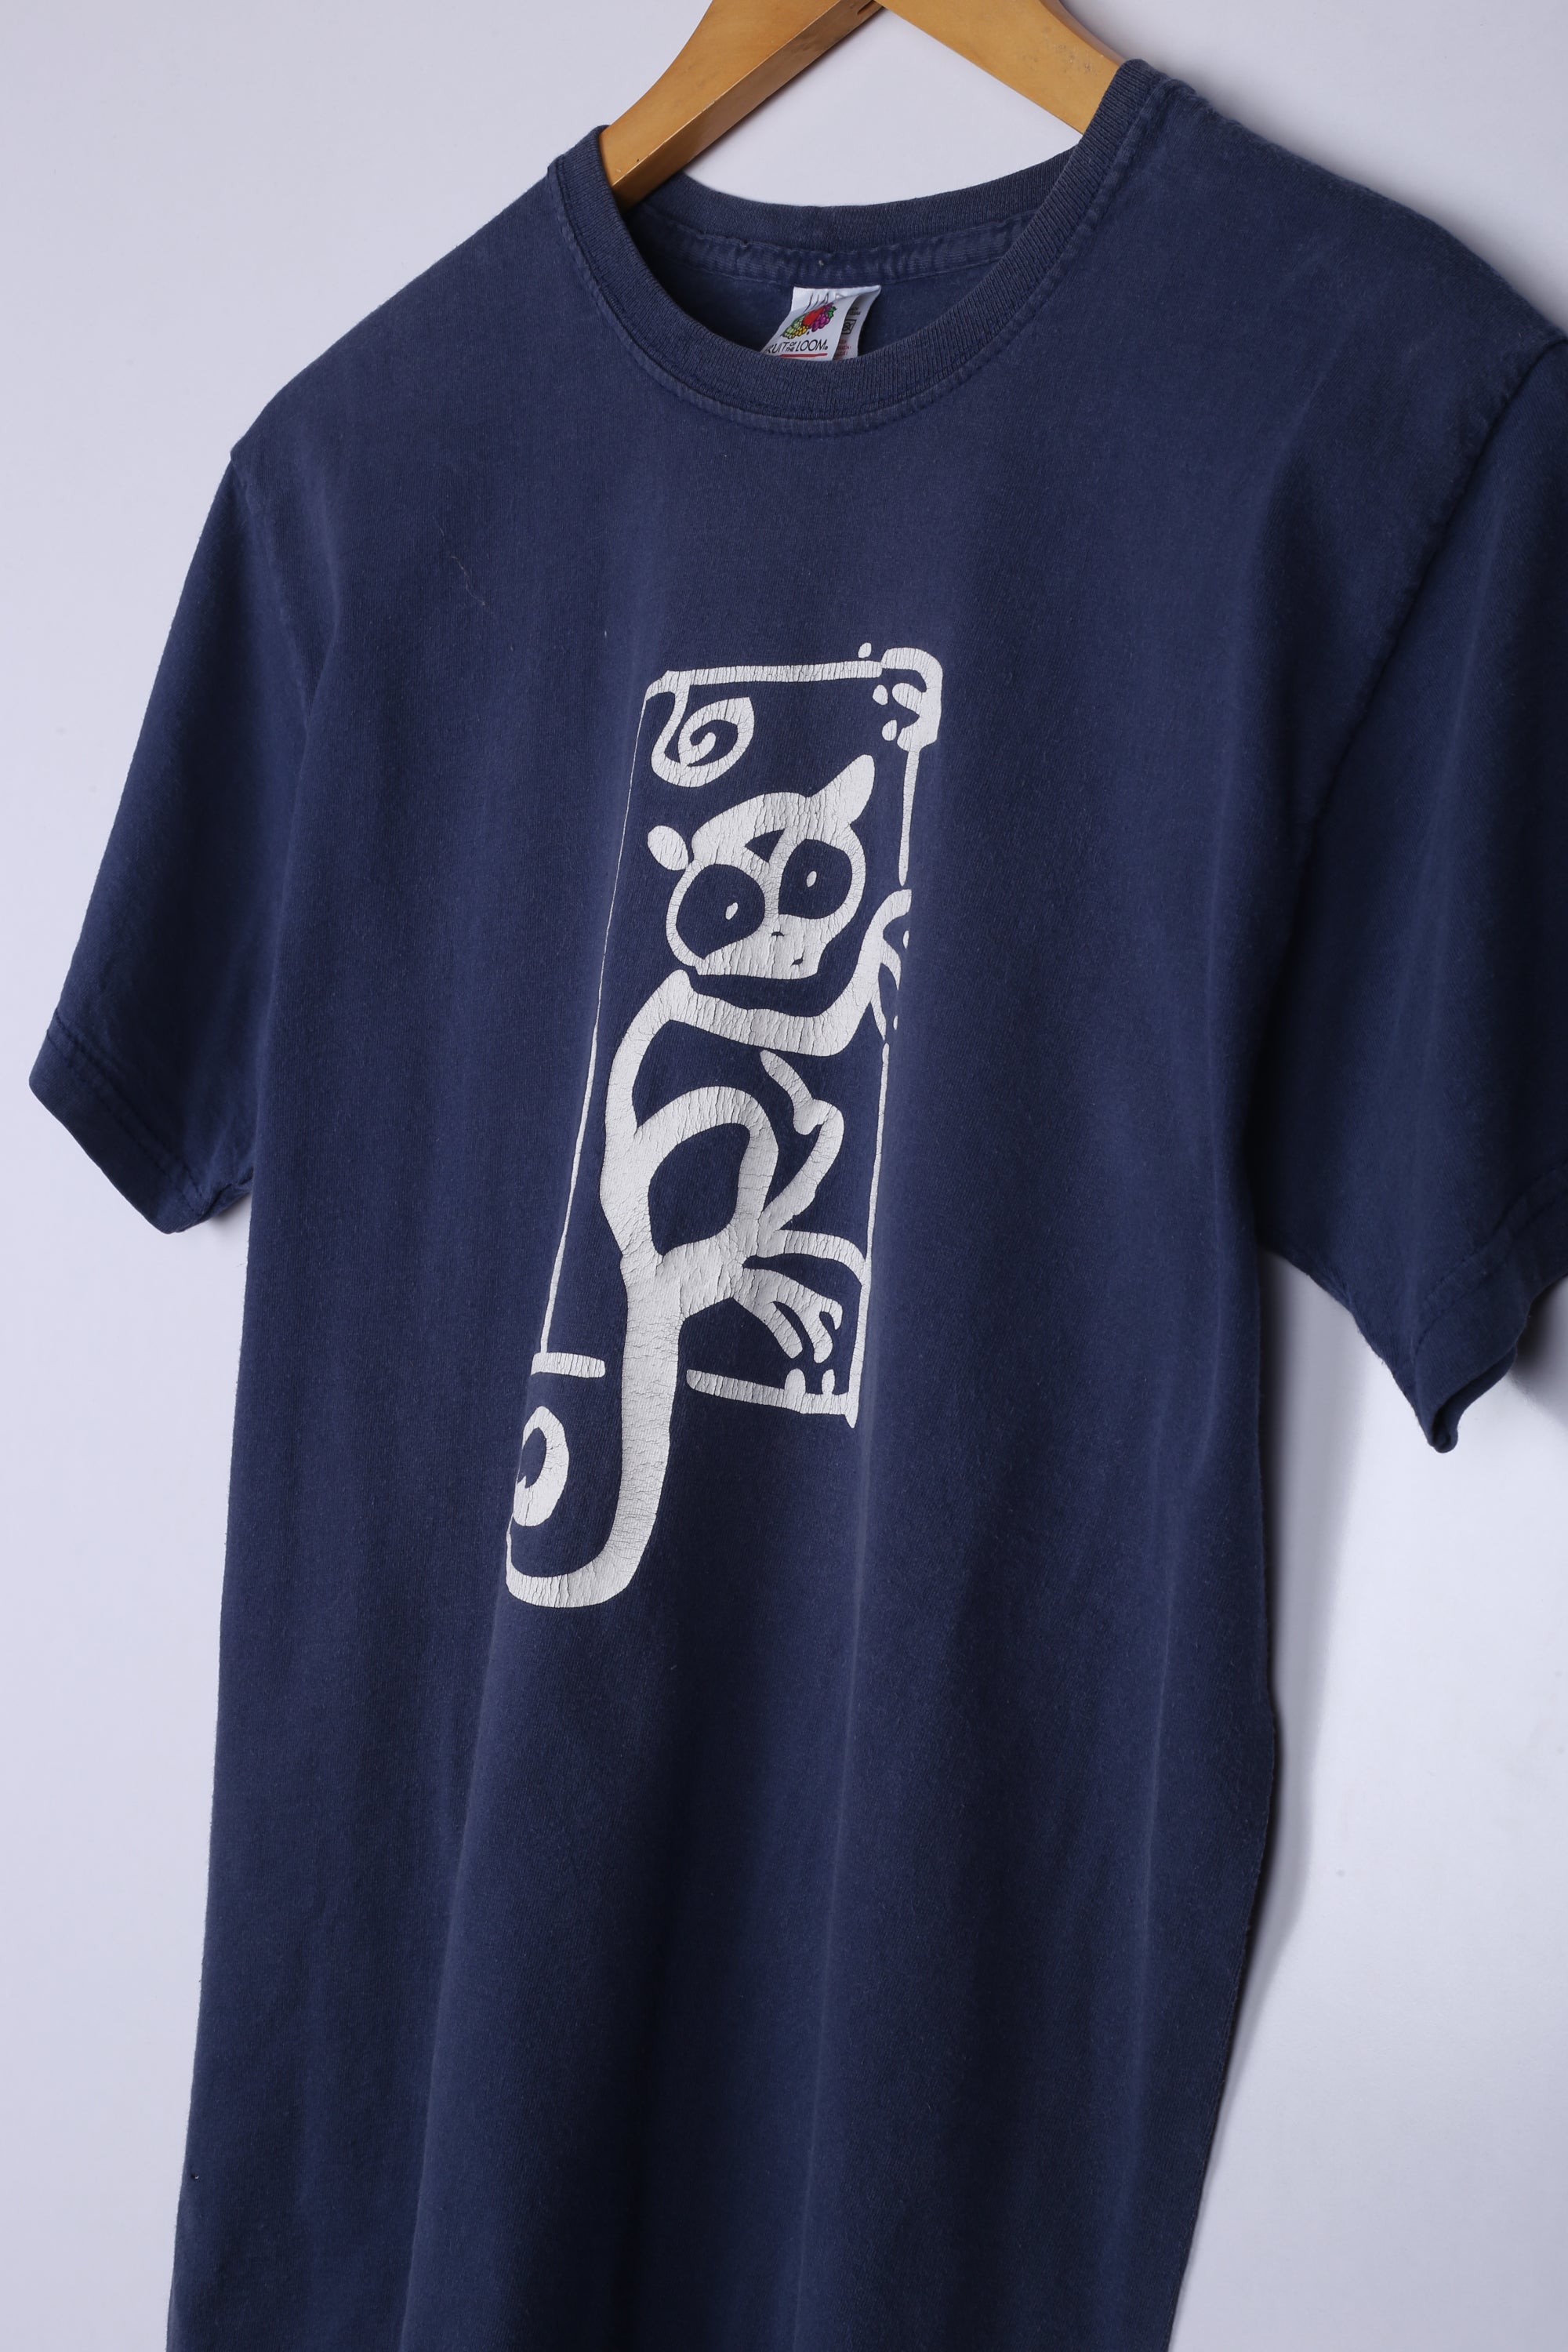 Vintage Fruit of the Loom Graphic Tee Blue Small